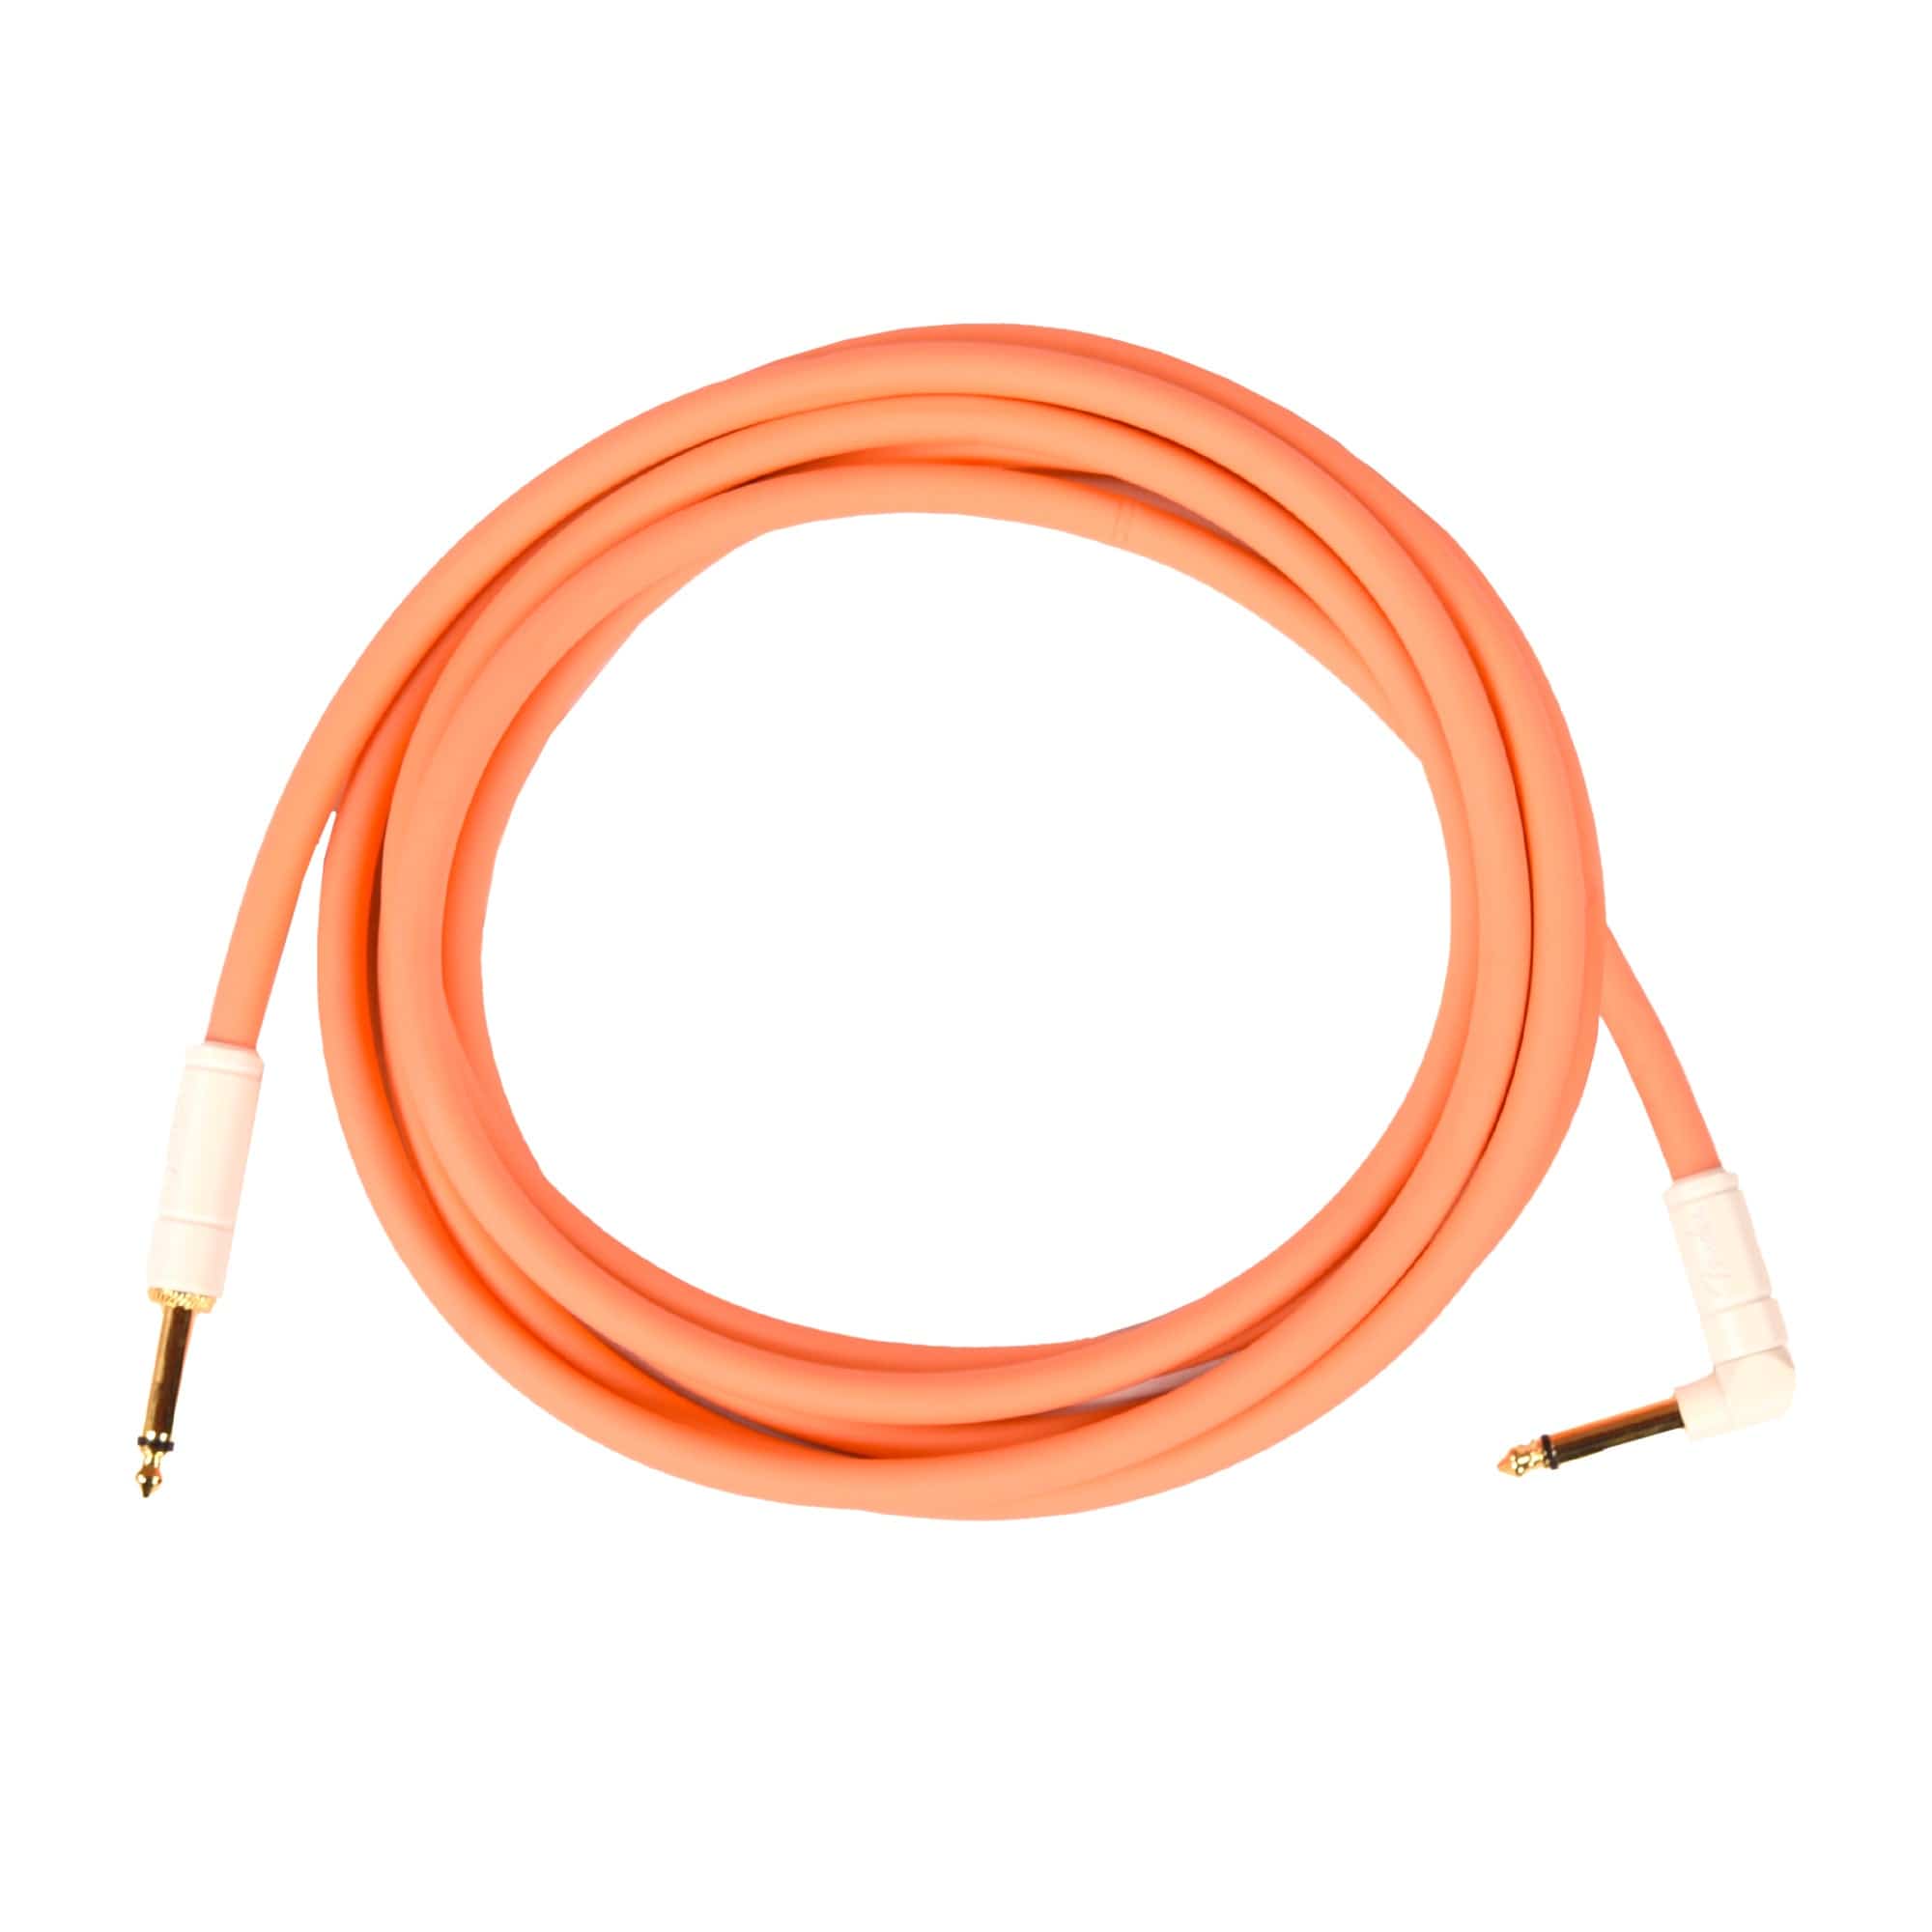 Fender Deluxe Instrument Cable Pacific Peach 15' Angle-Straight Accessories / Cables